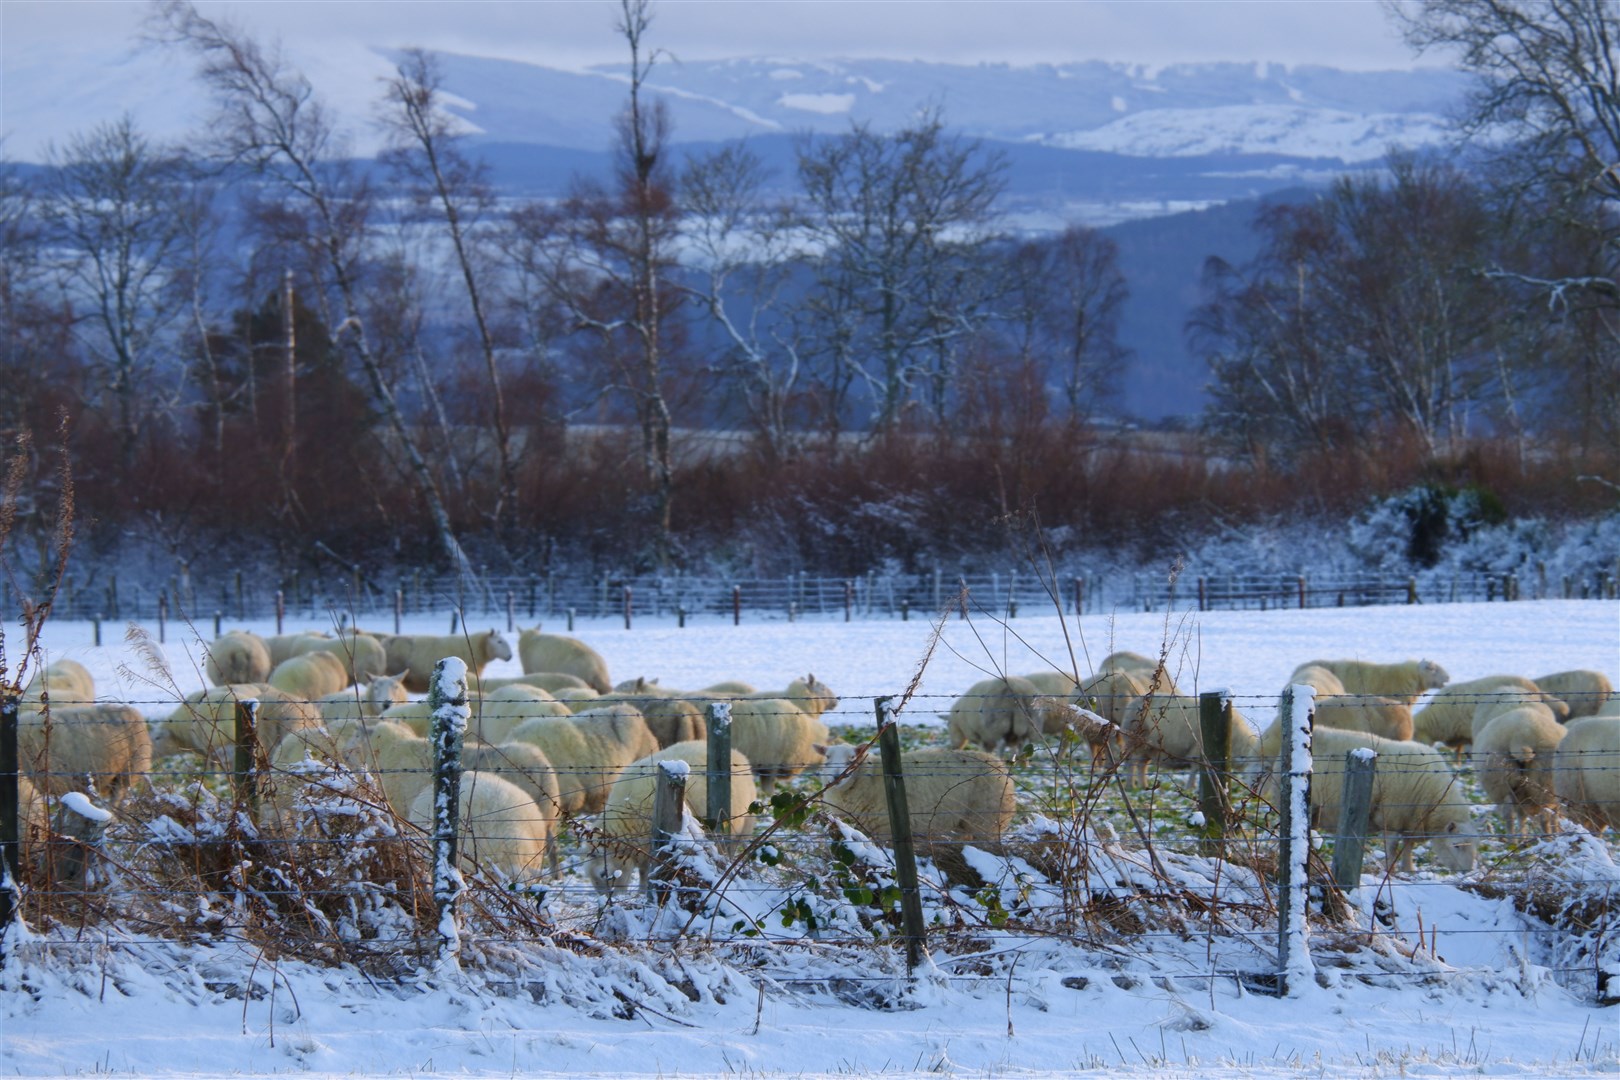 Sheep on the Black Isle in the snow as the sun was starting to set. Picture: Hilary de Vries